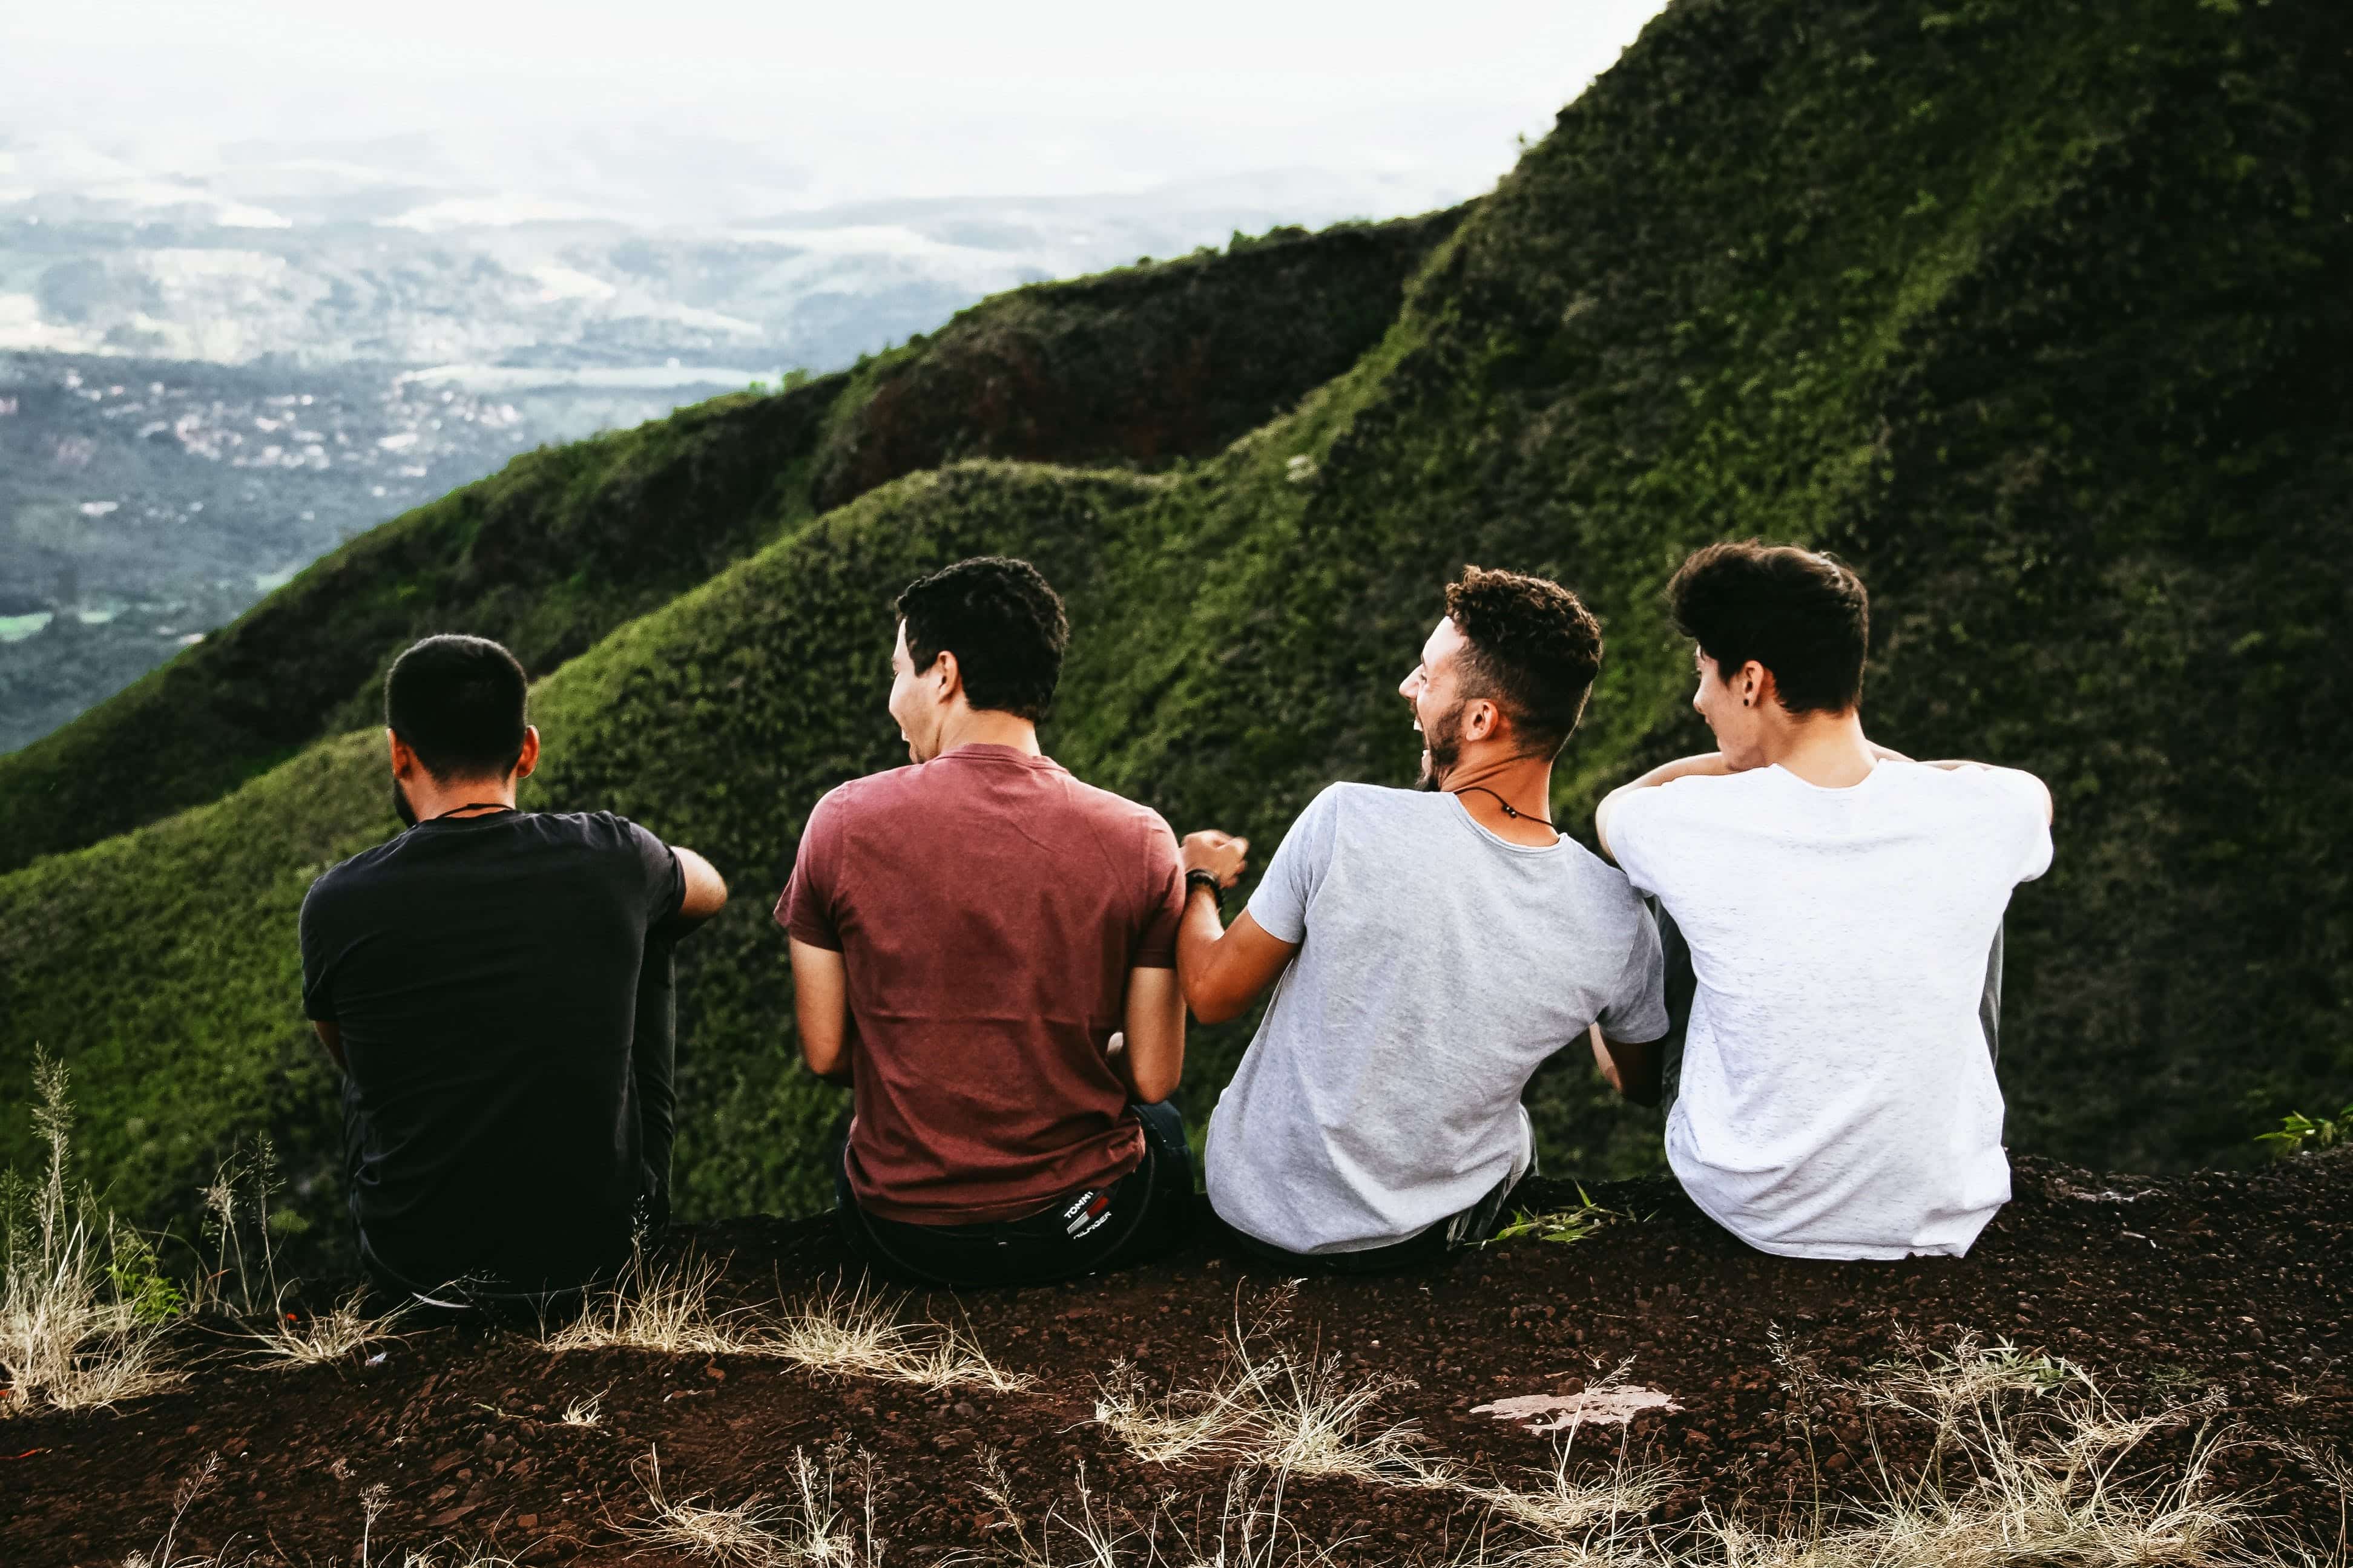 A group of friends laughing and talking at a natural viewpoint